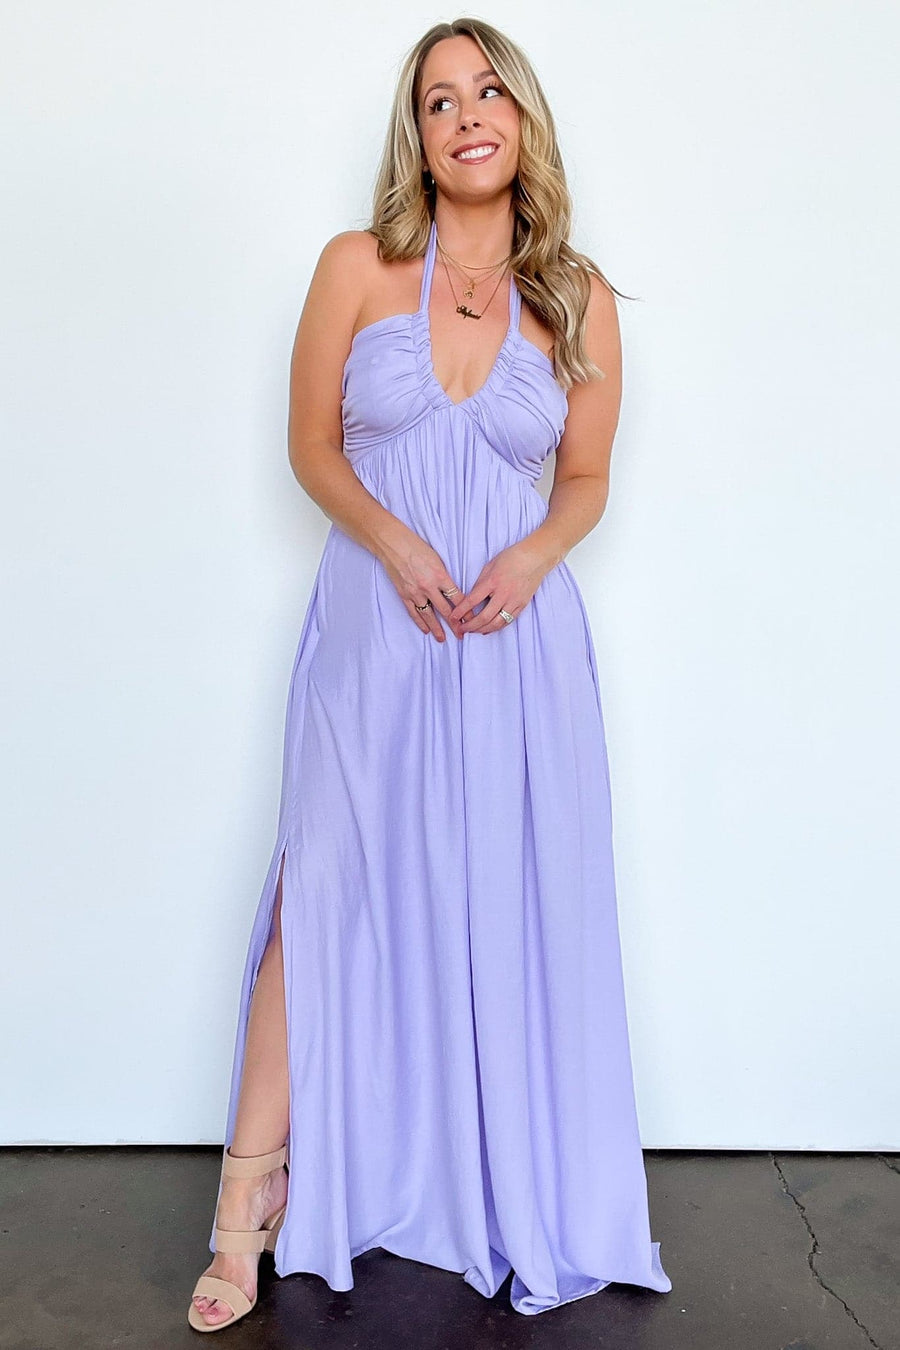  Alexaly Flowy Halter Maxi Dress - FINAL SALE - Madison and Mallory